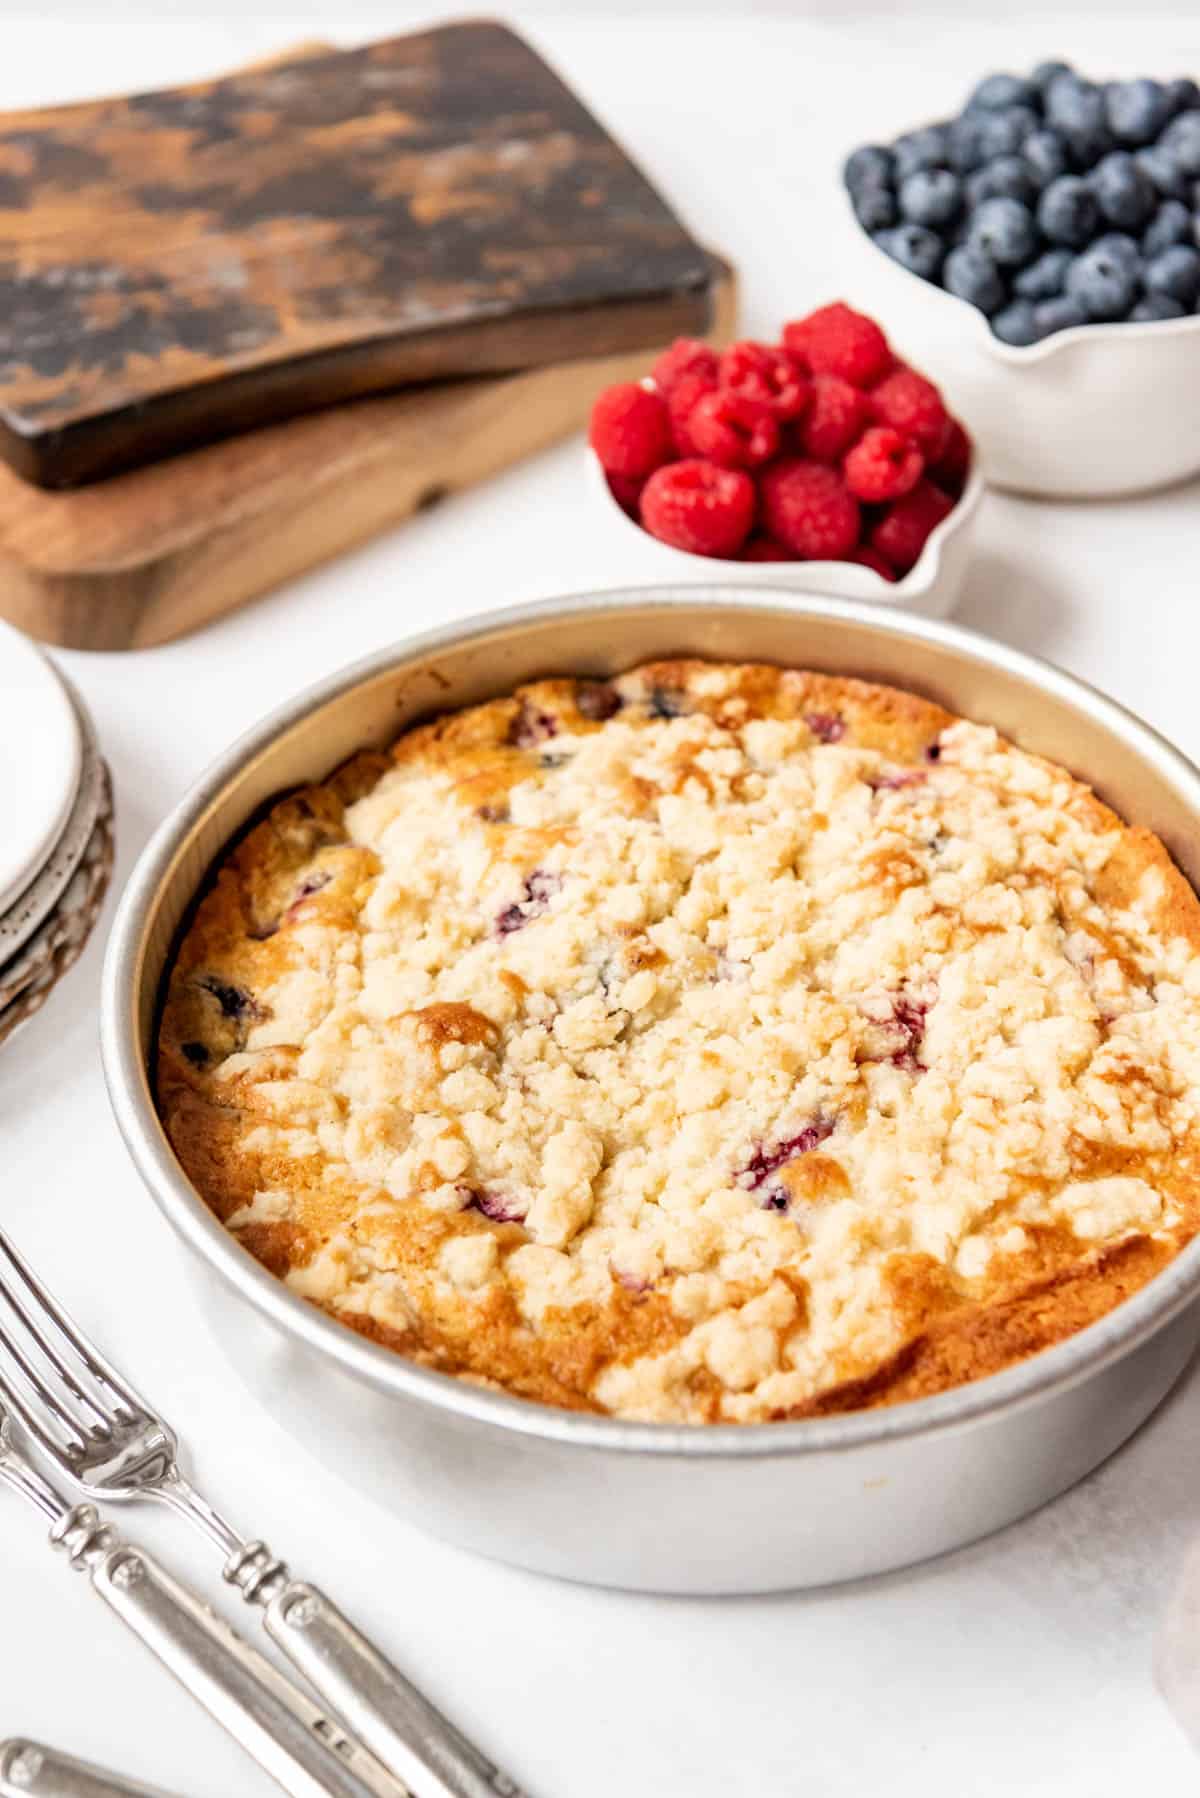 Baked berry breakfast cake cooling in a pan.